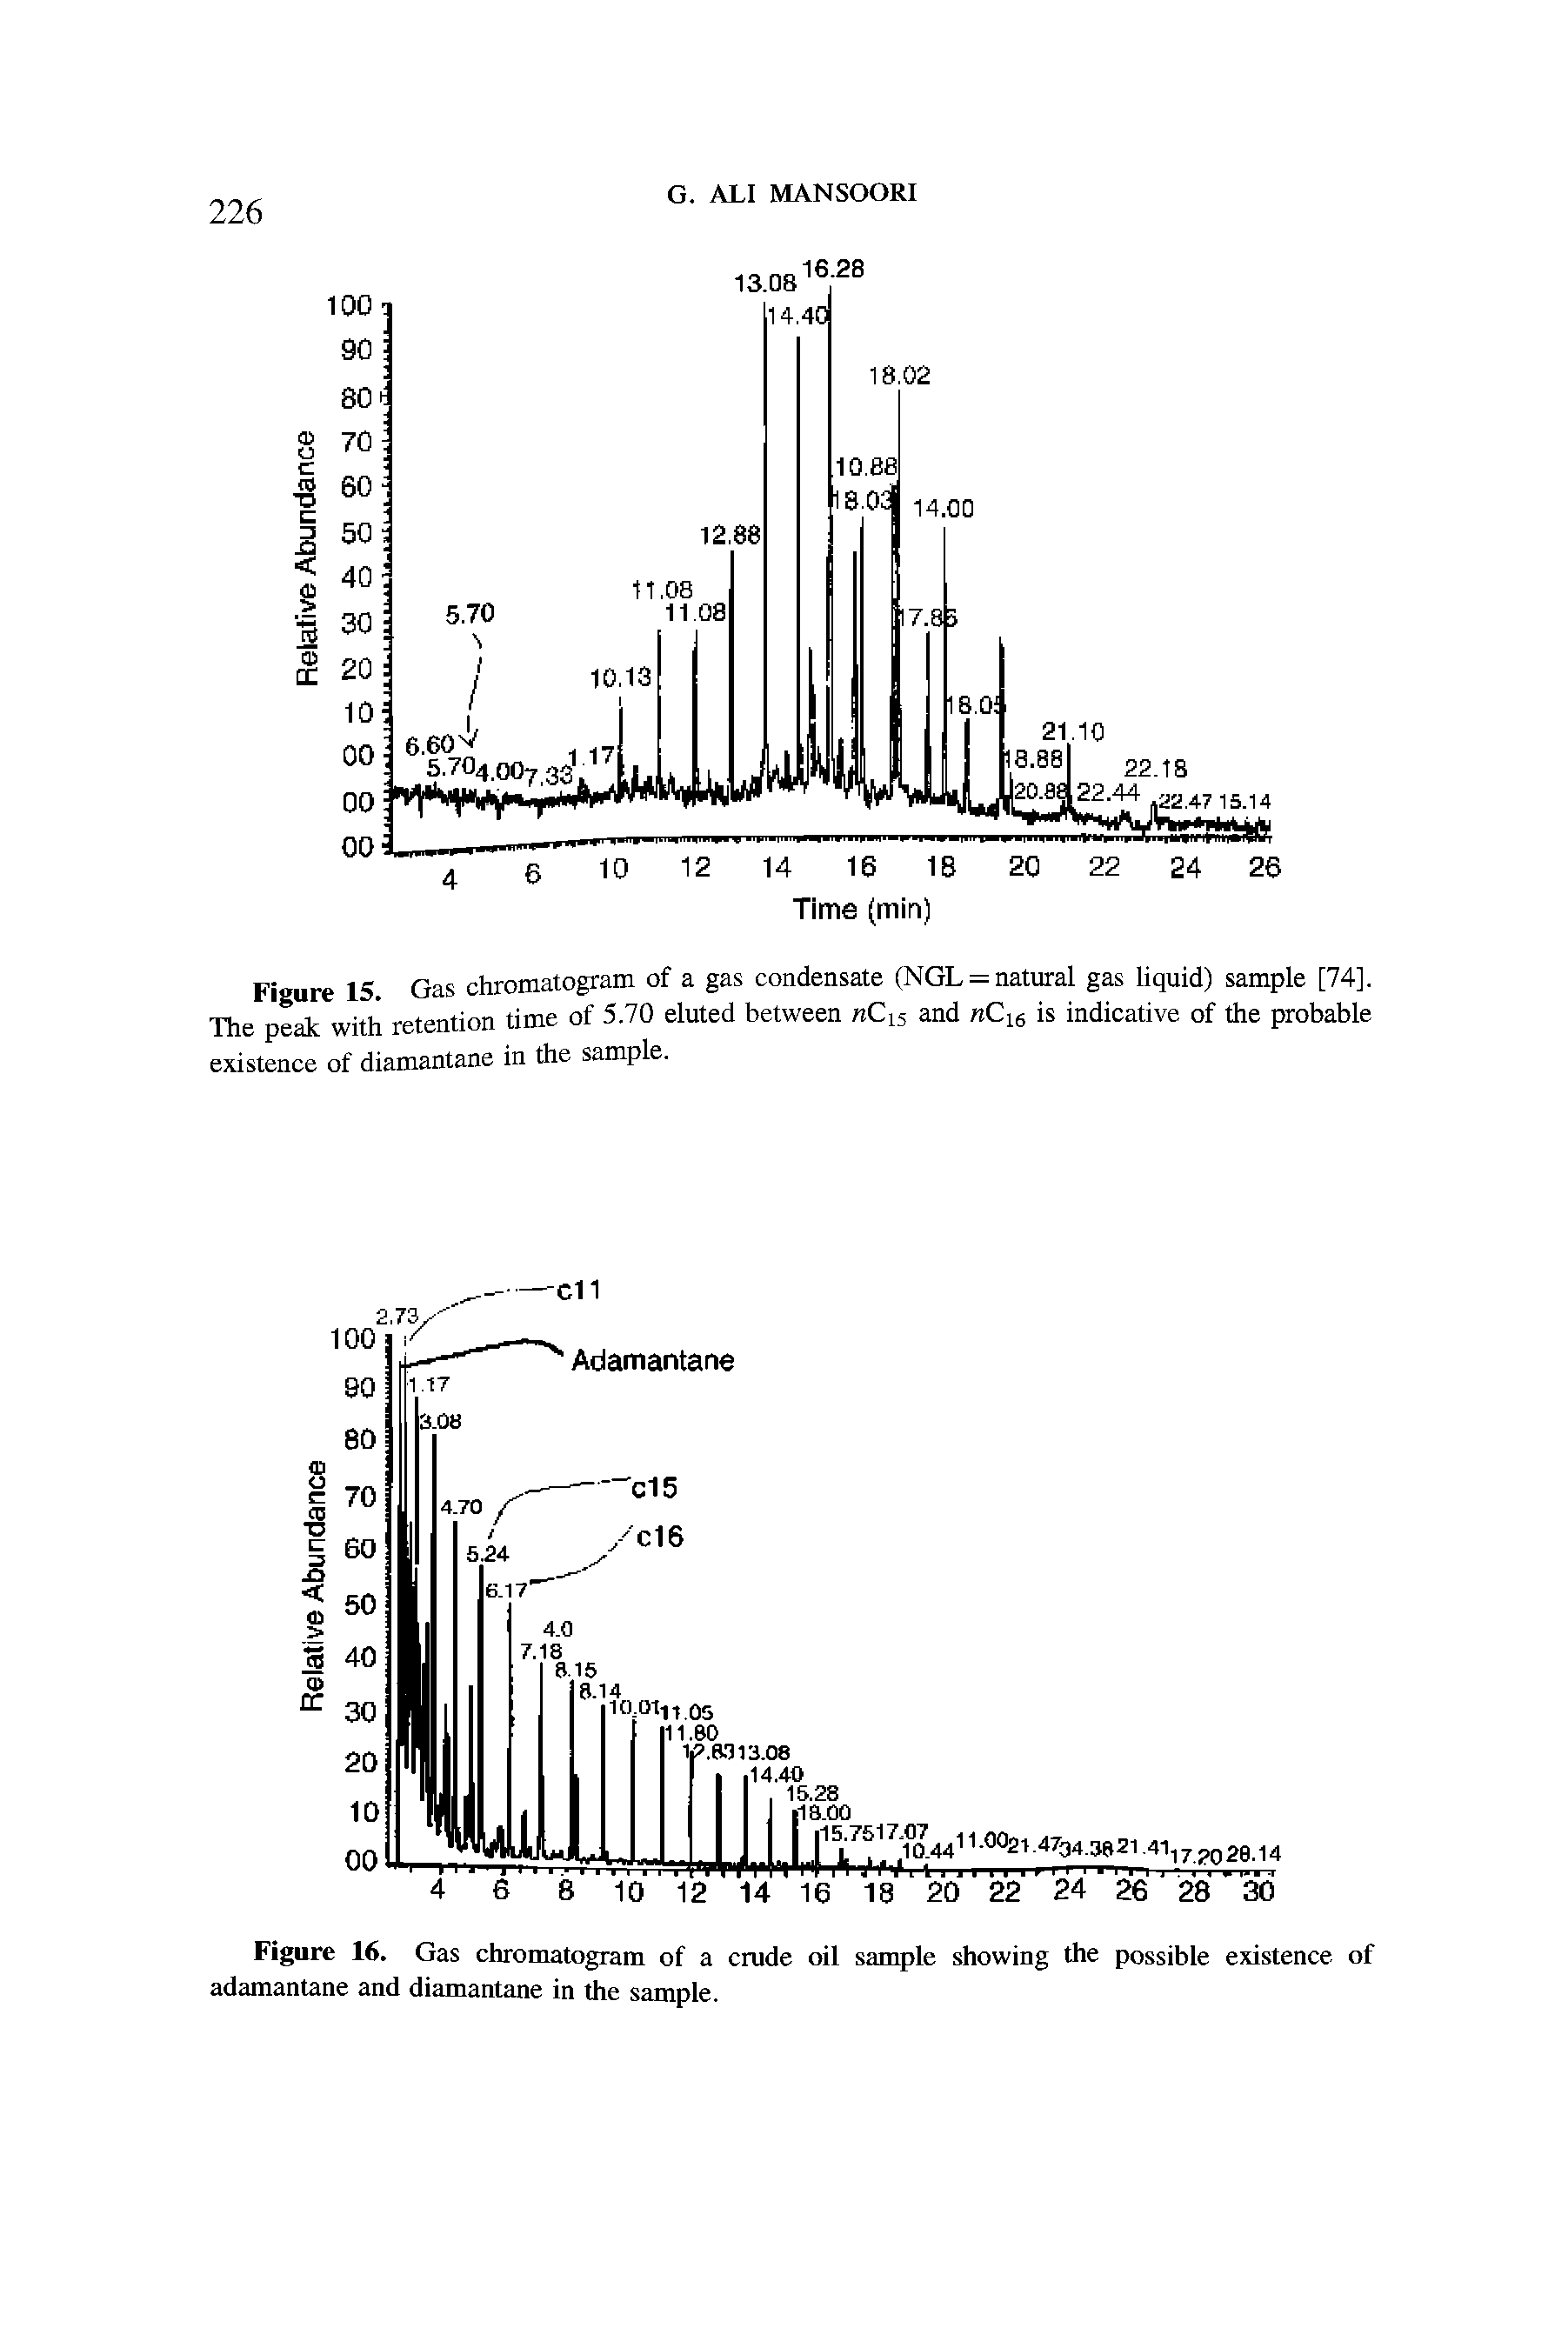 Figure 16. Gas chromatogram of a crude oil sample showing the possible existence of adamantane and diamantane in the sample.